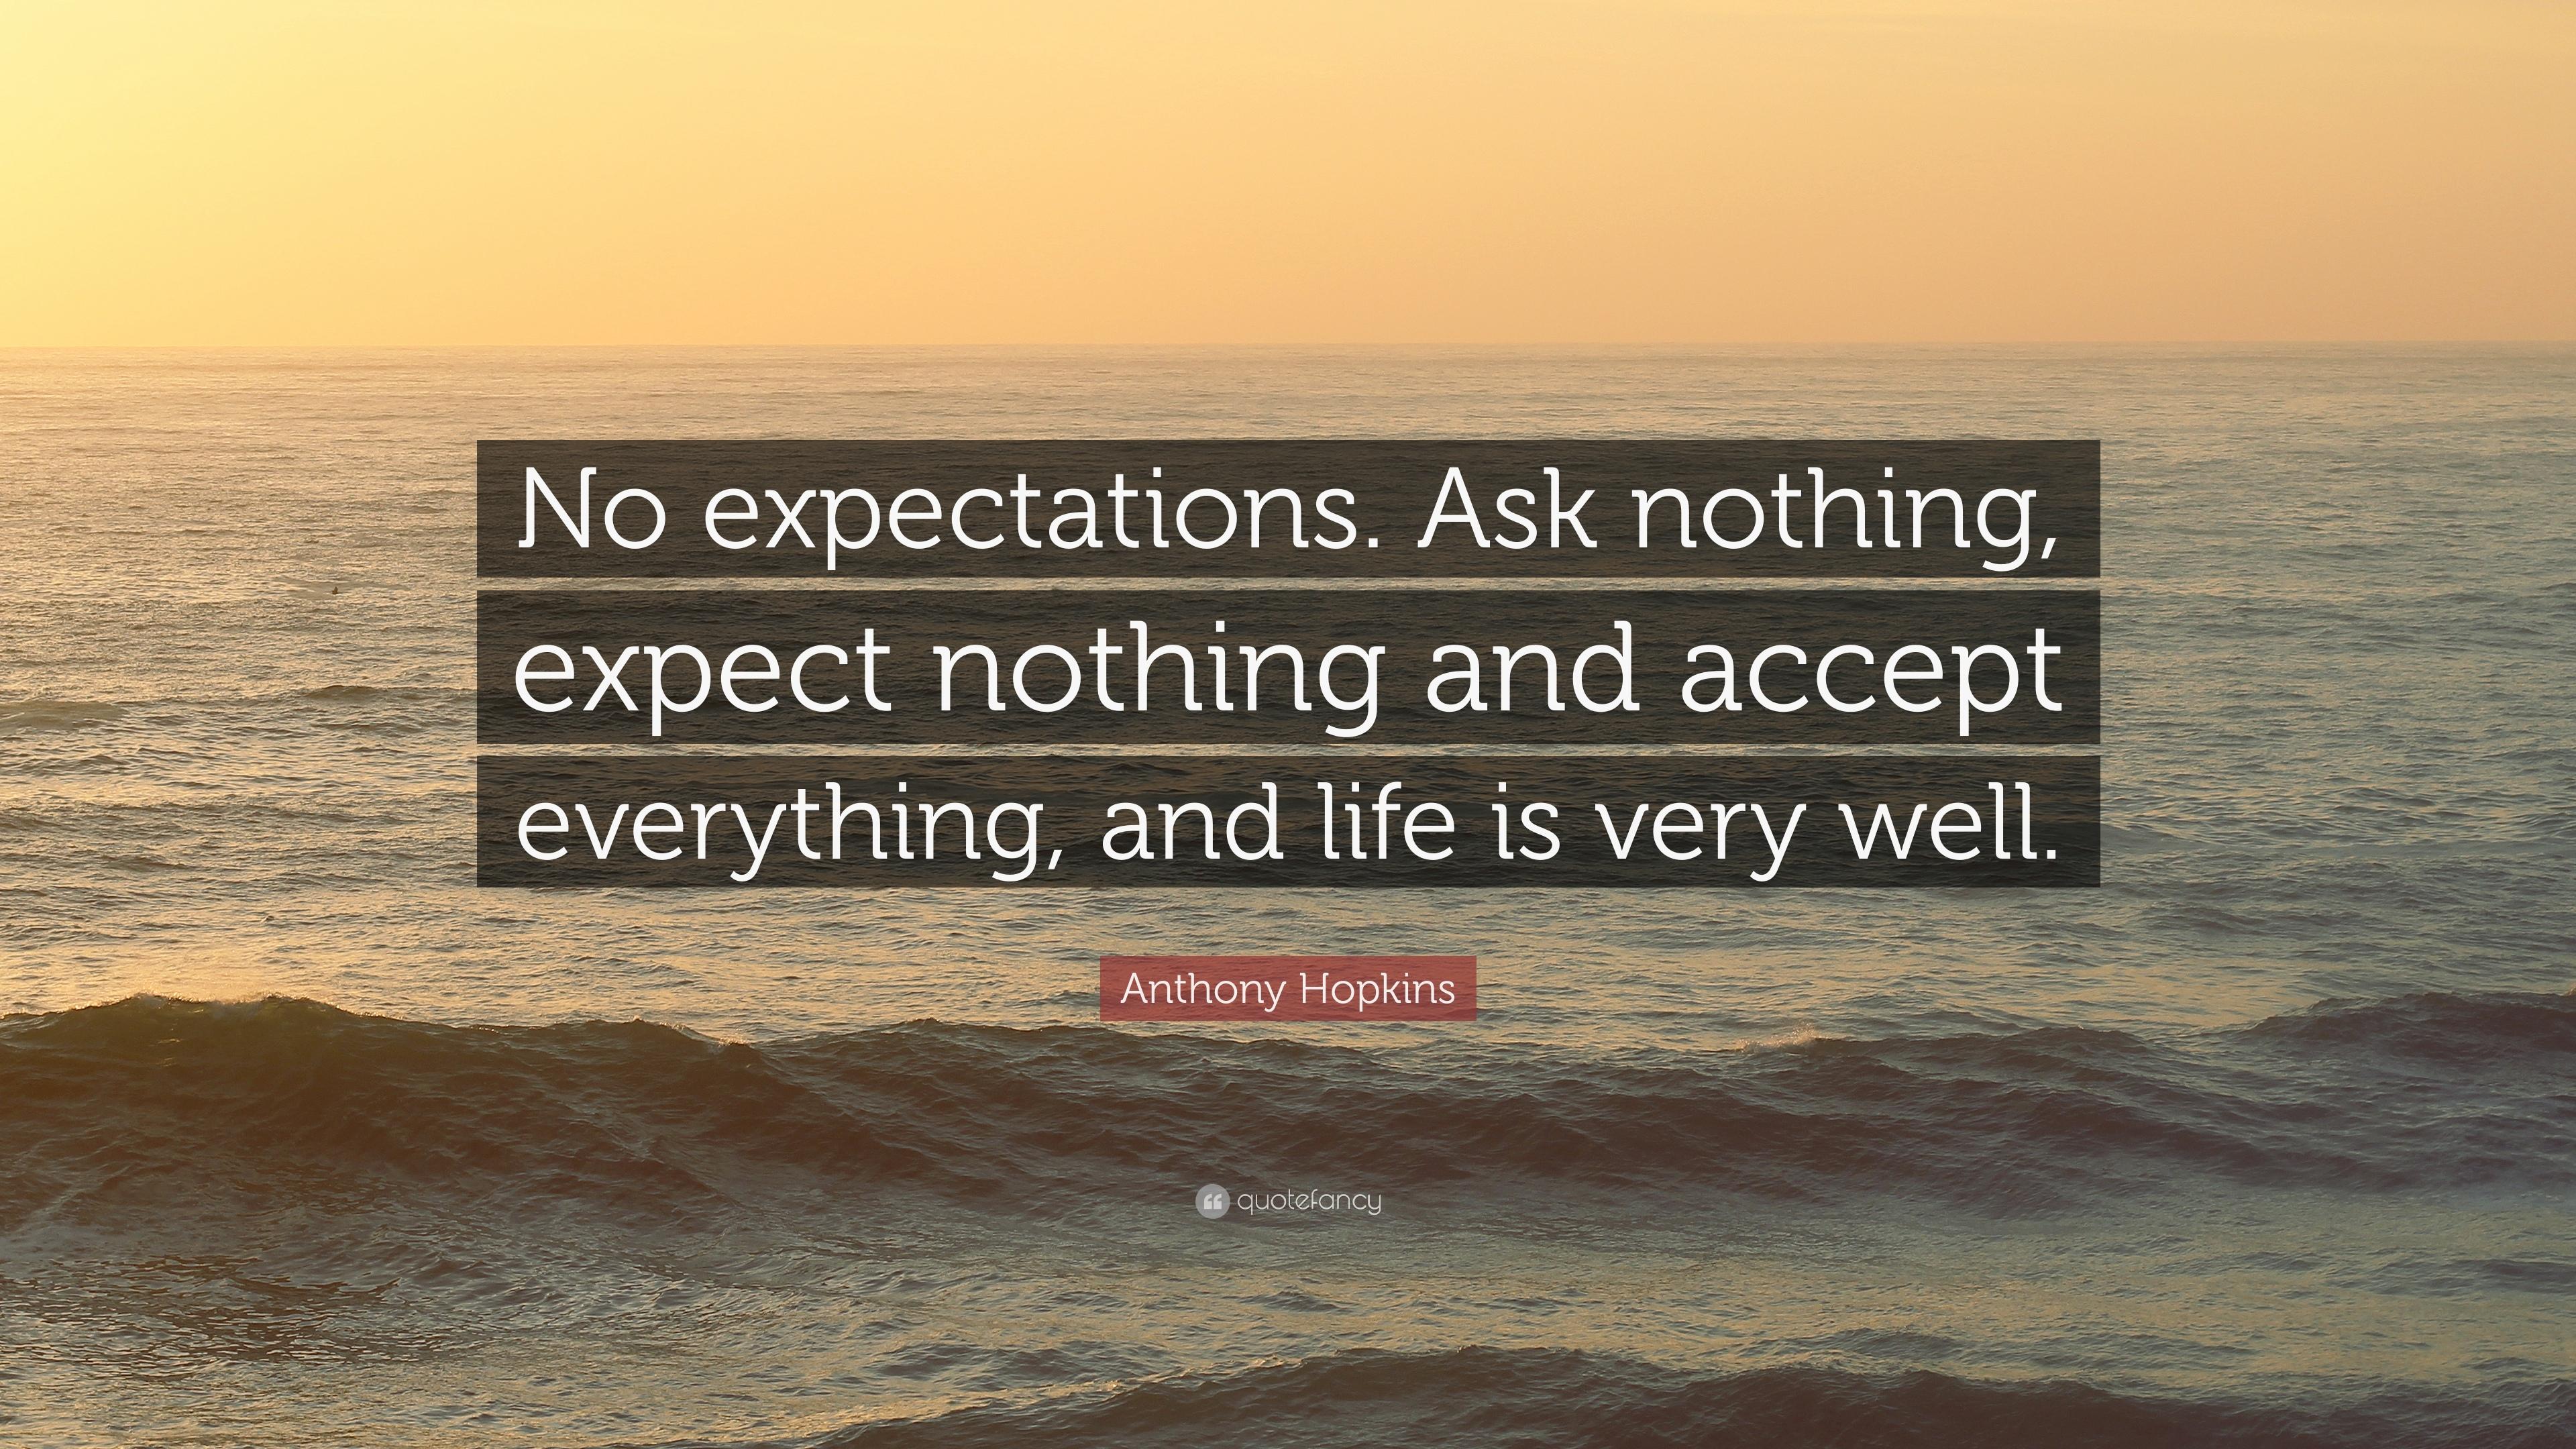 Anthony Hopkins Quote: “No expectations. Ask nothing, expect